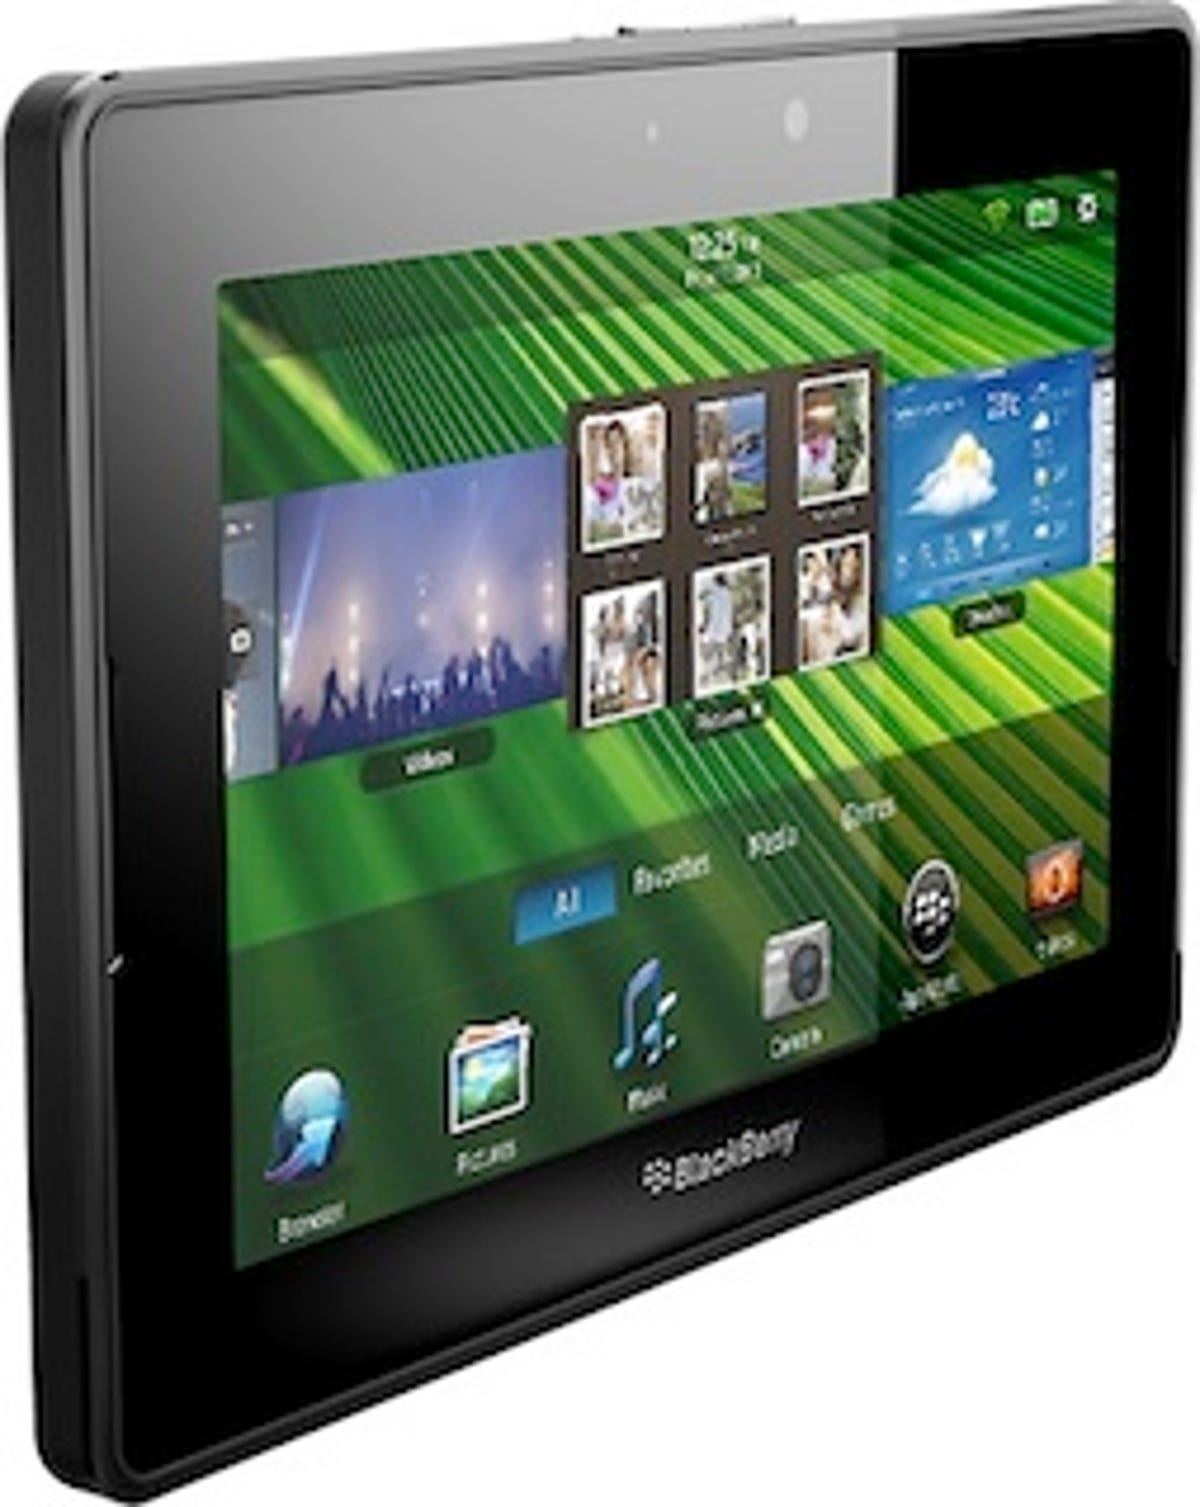 As of Thursday, Best Buy is offering the 64GB PlayBook tablet for $550--$150 off the regular price.